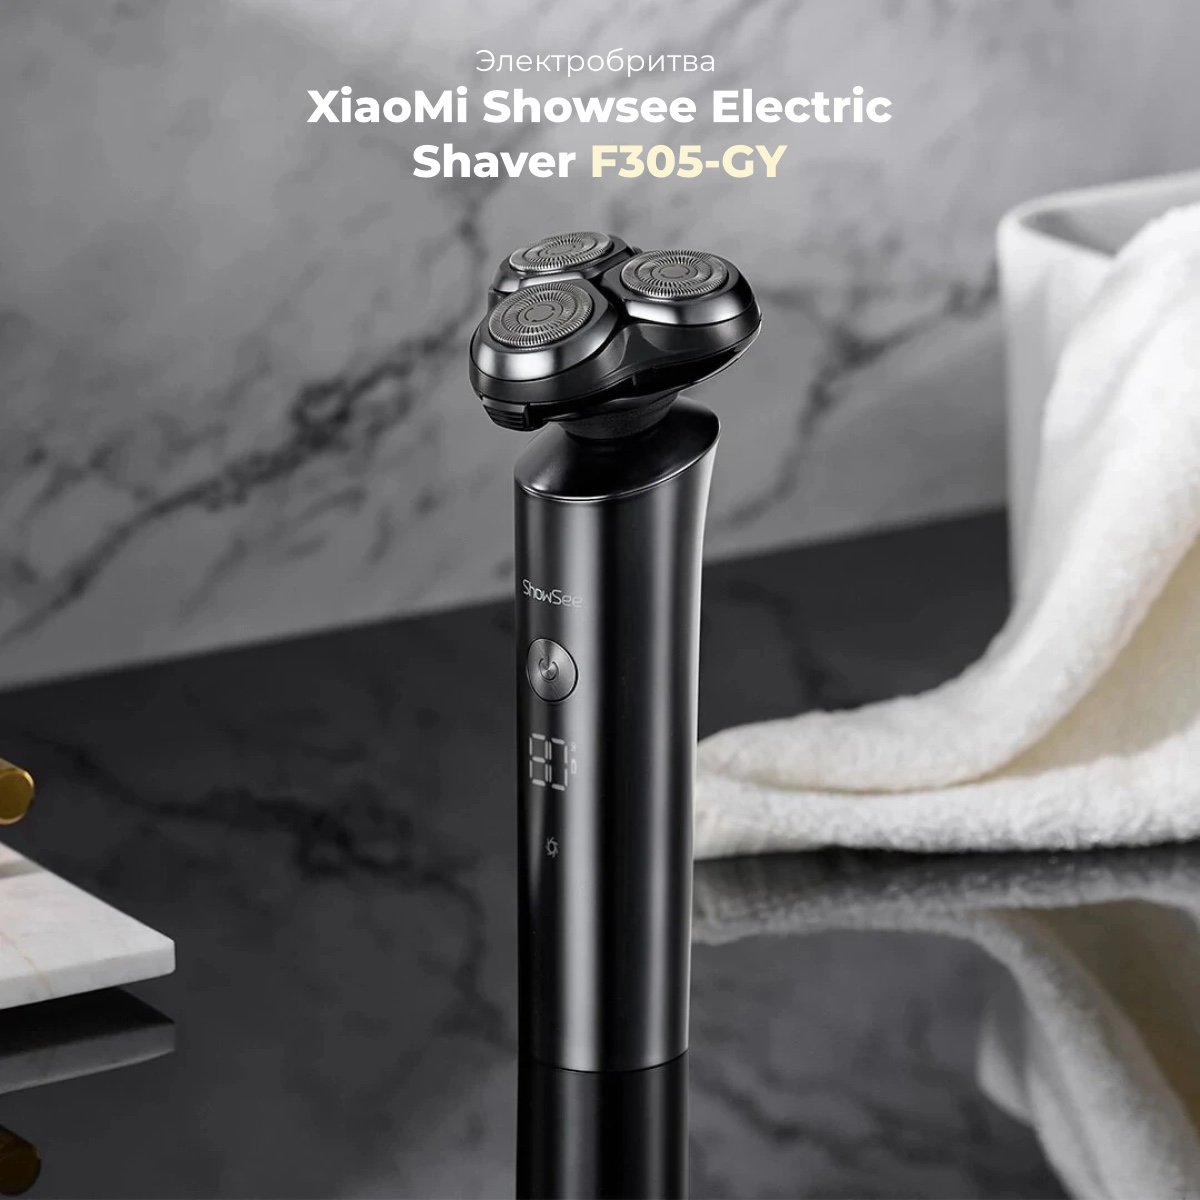 XiaoMi-Showsee-Electric-Shaver-F305-GY-01